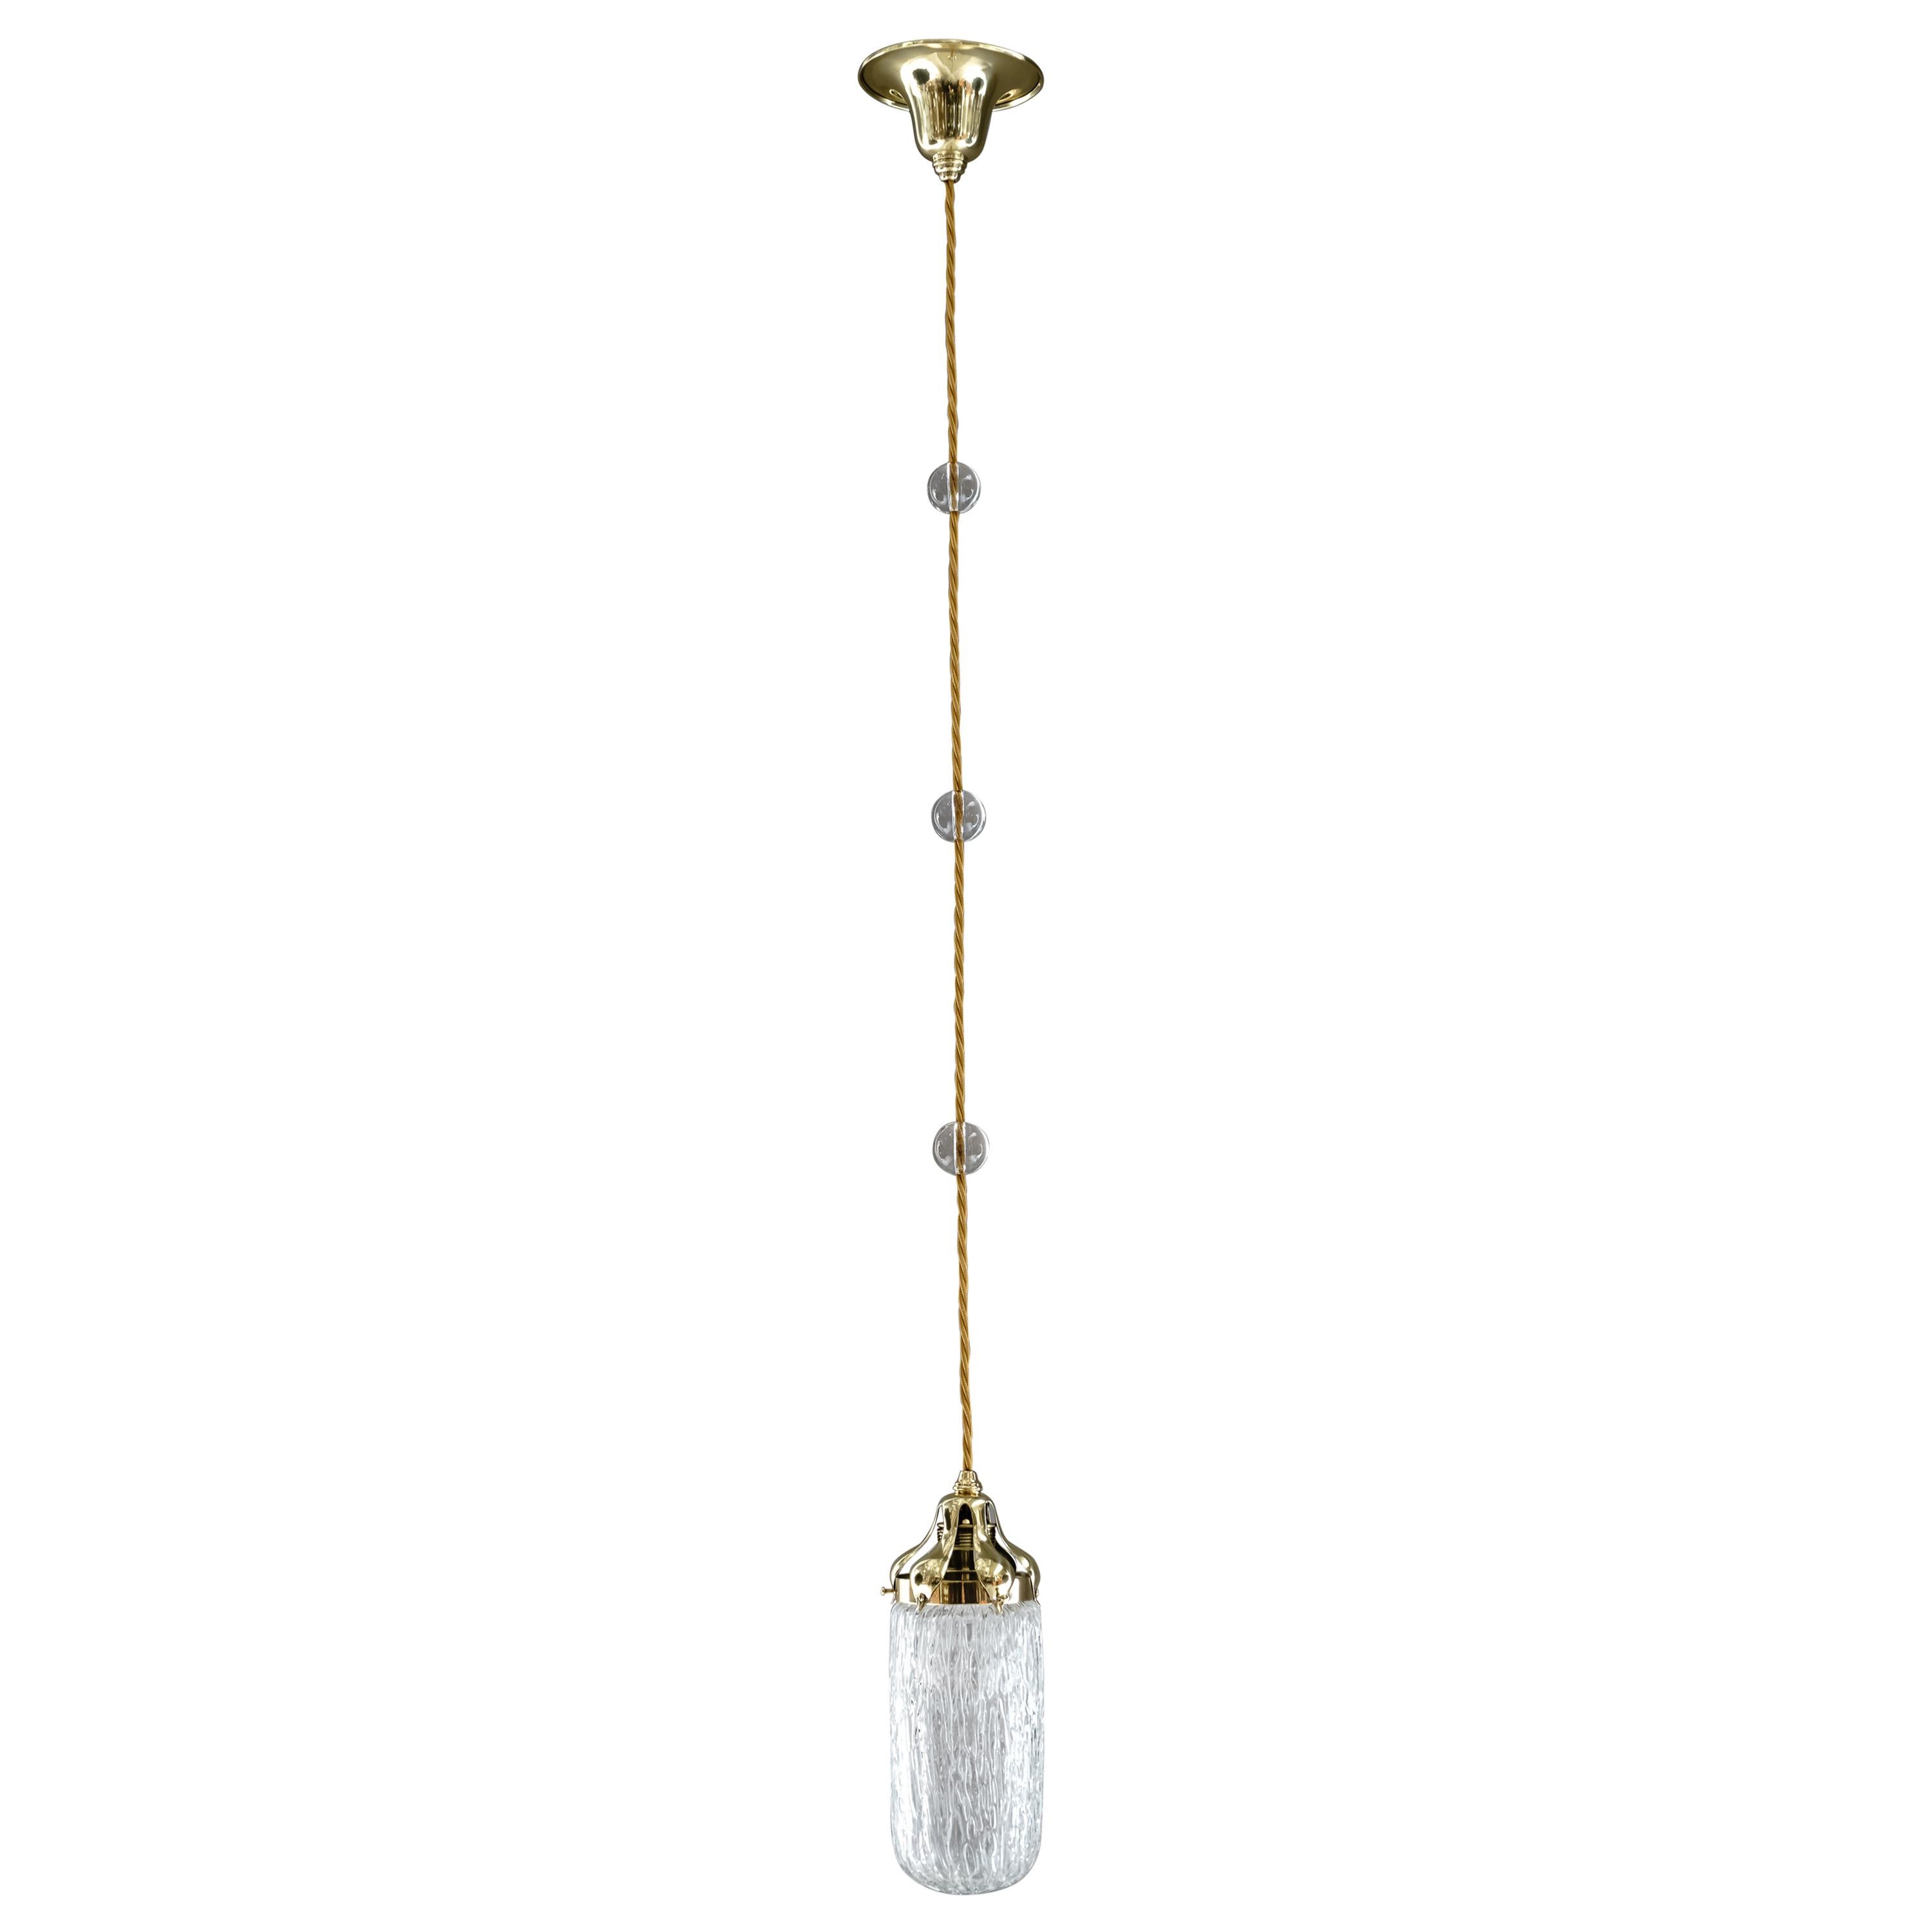 Leopold Bauer Hanging Lamp with Loetz Witwe “Blitzglas” Shade, circa 1905 For Sale